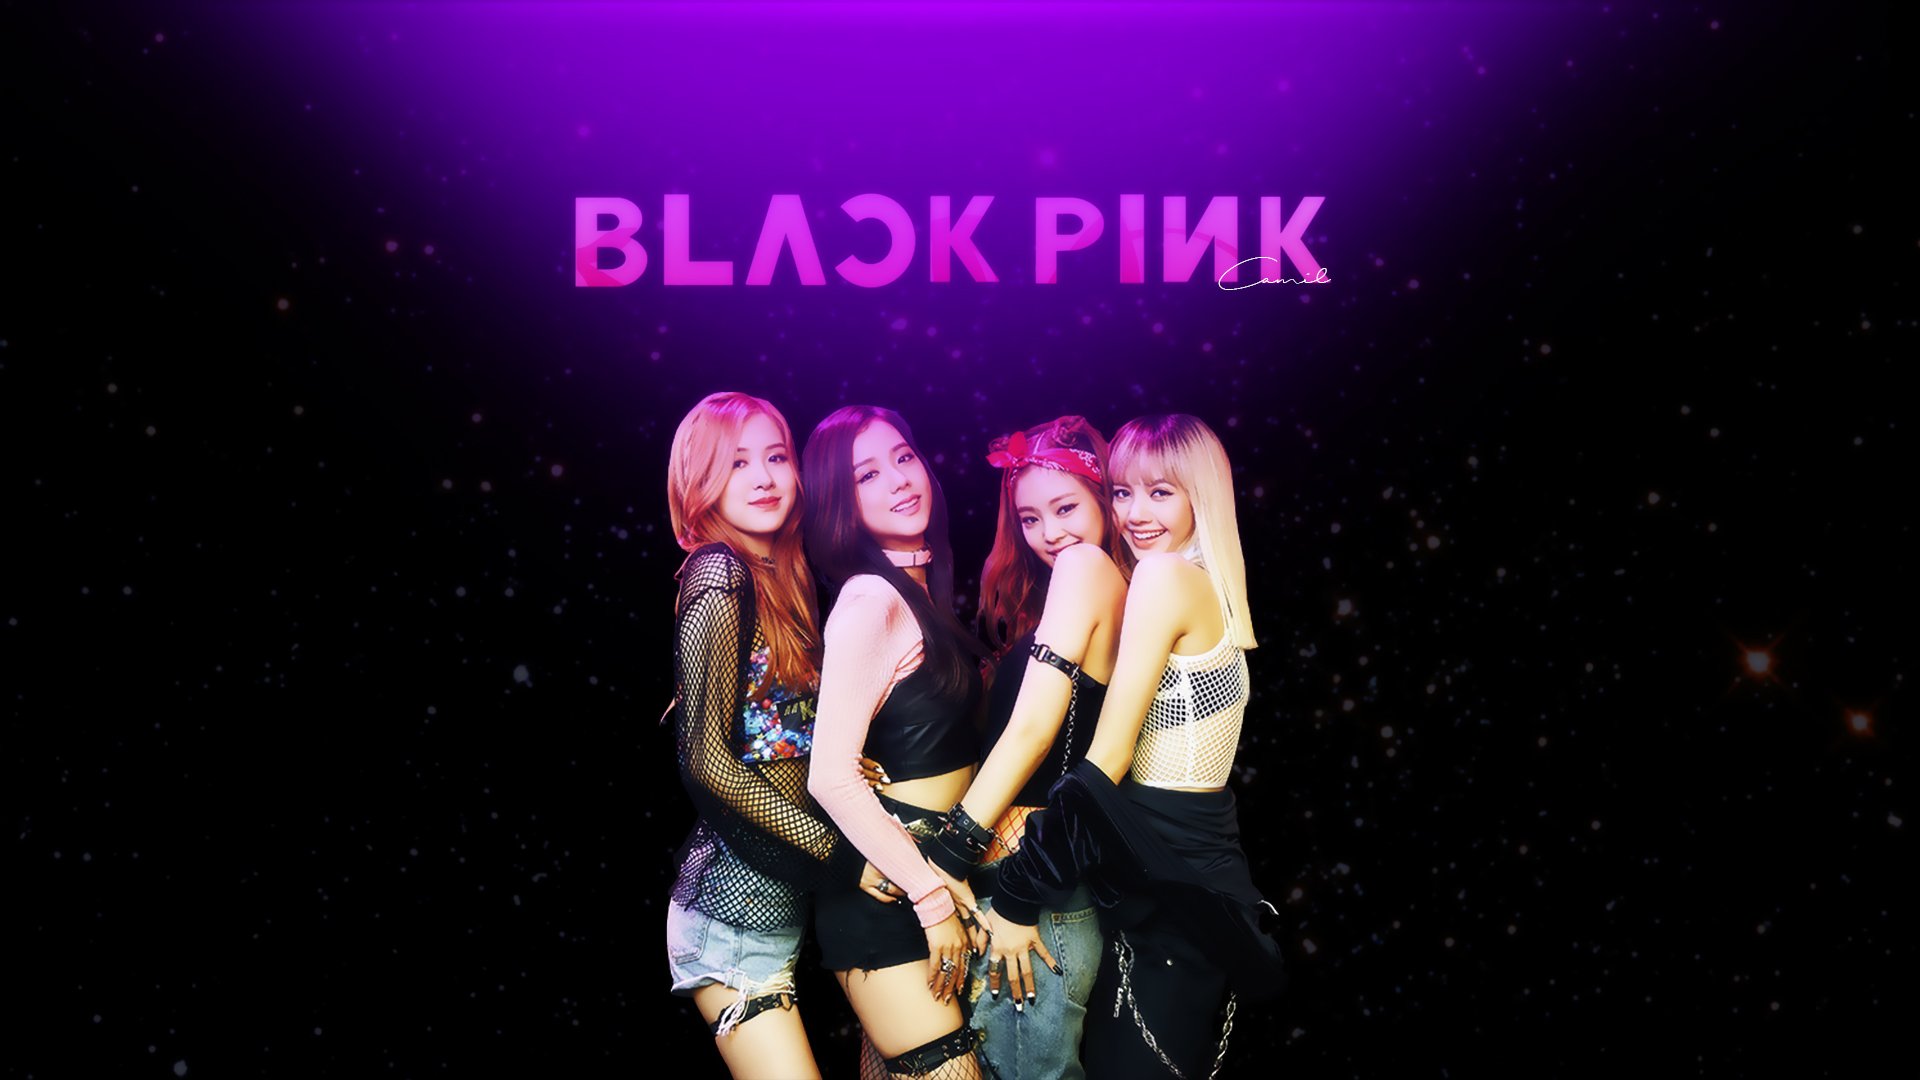 Blackpink Hd Wallpapers Background Images Wallpaper Abyss